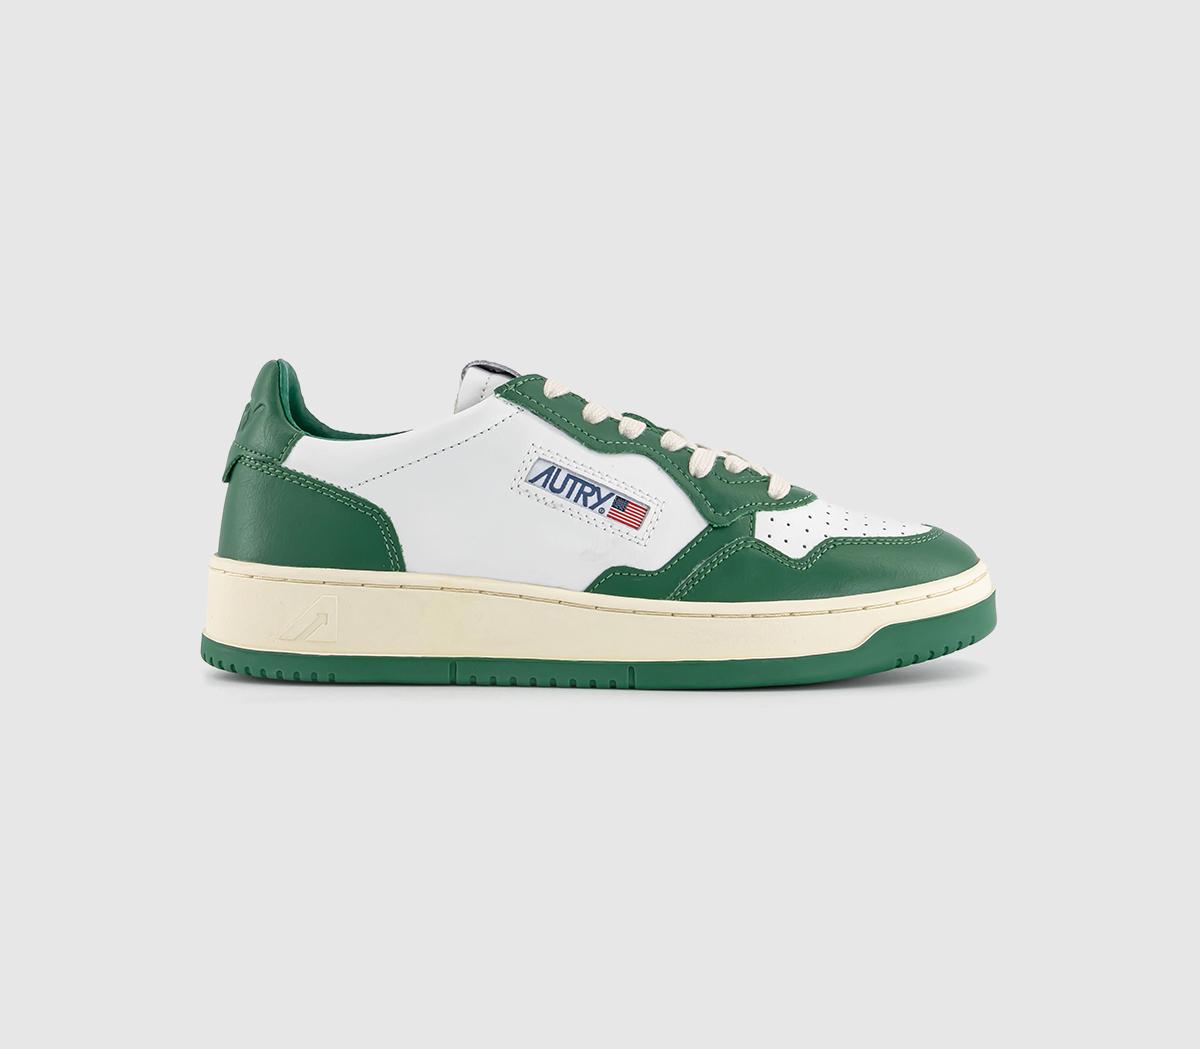 AUTRYMedalist Low TrainersLeather White Green Green F